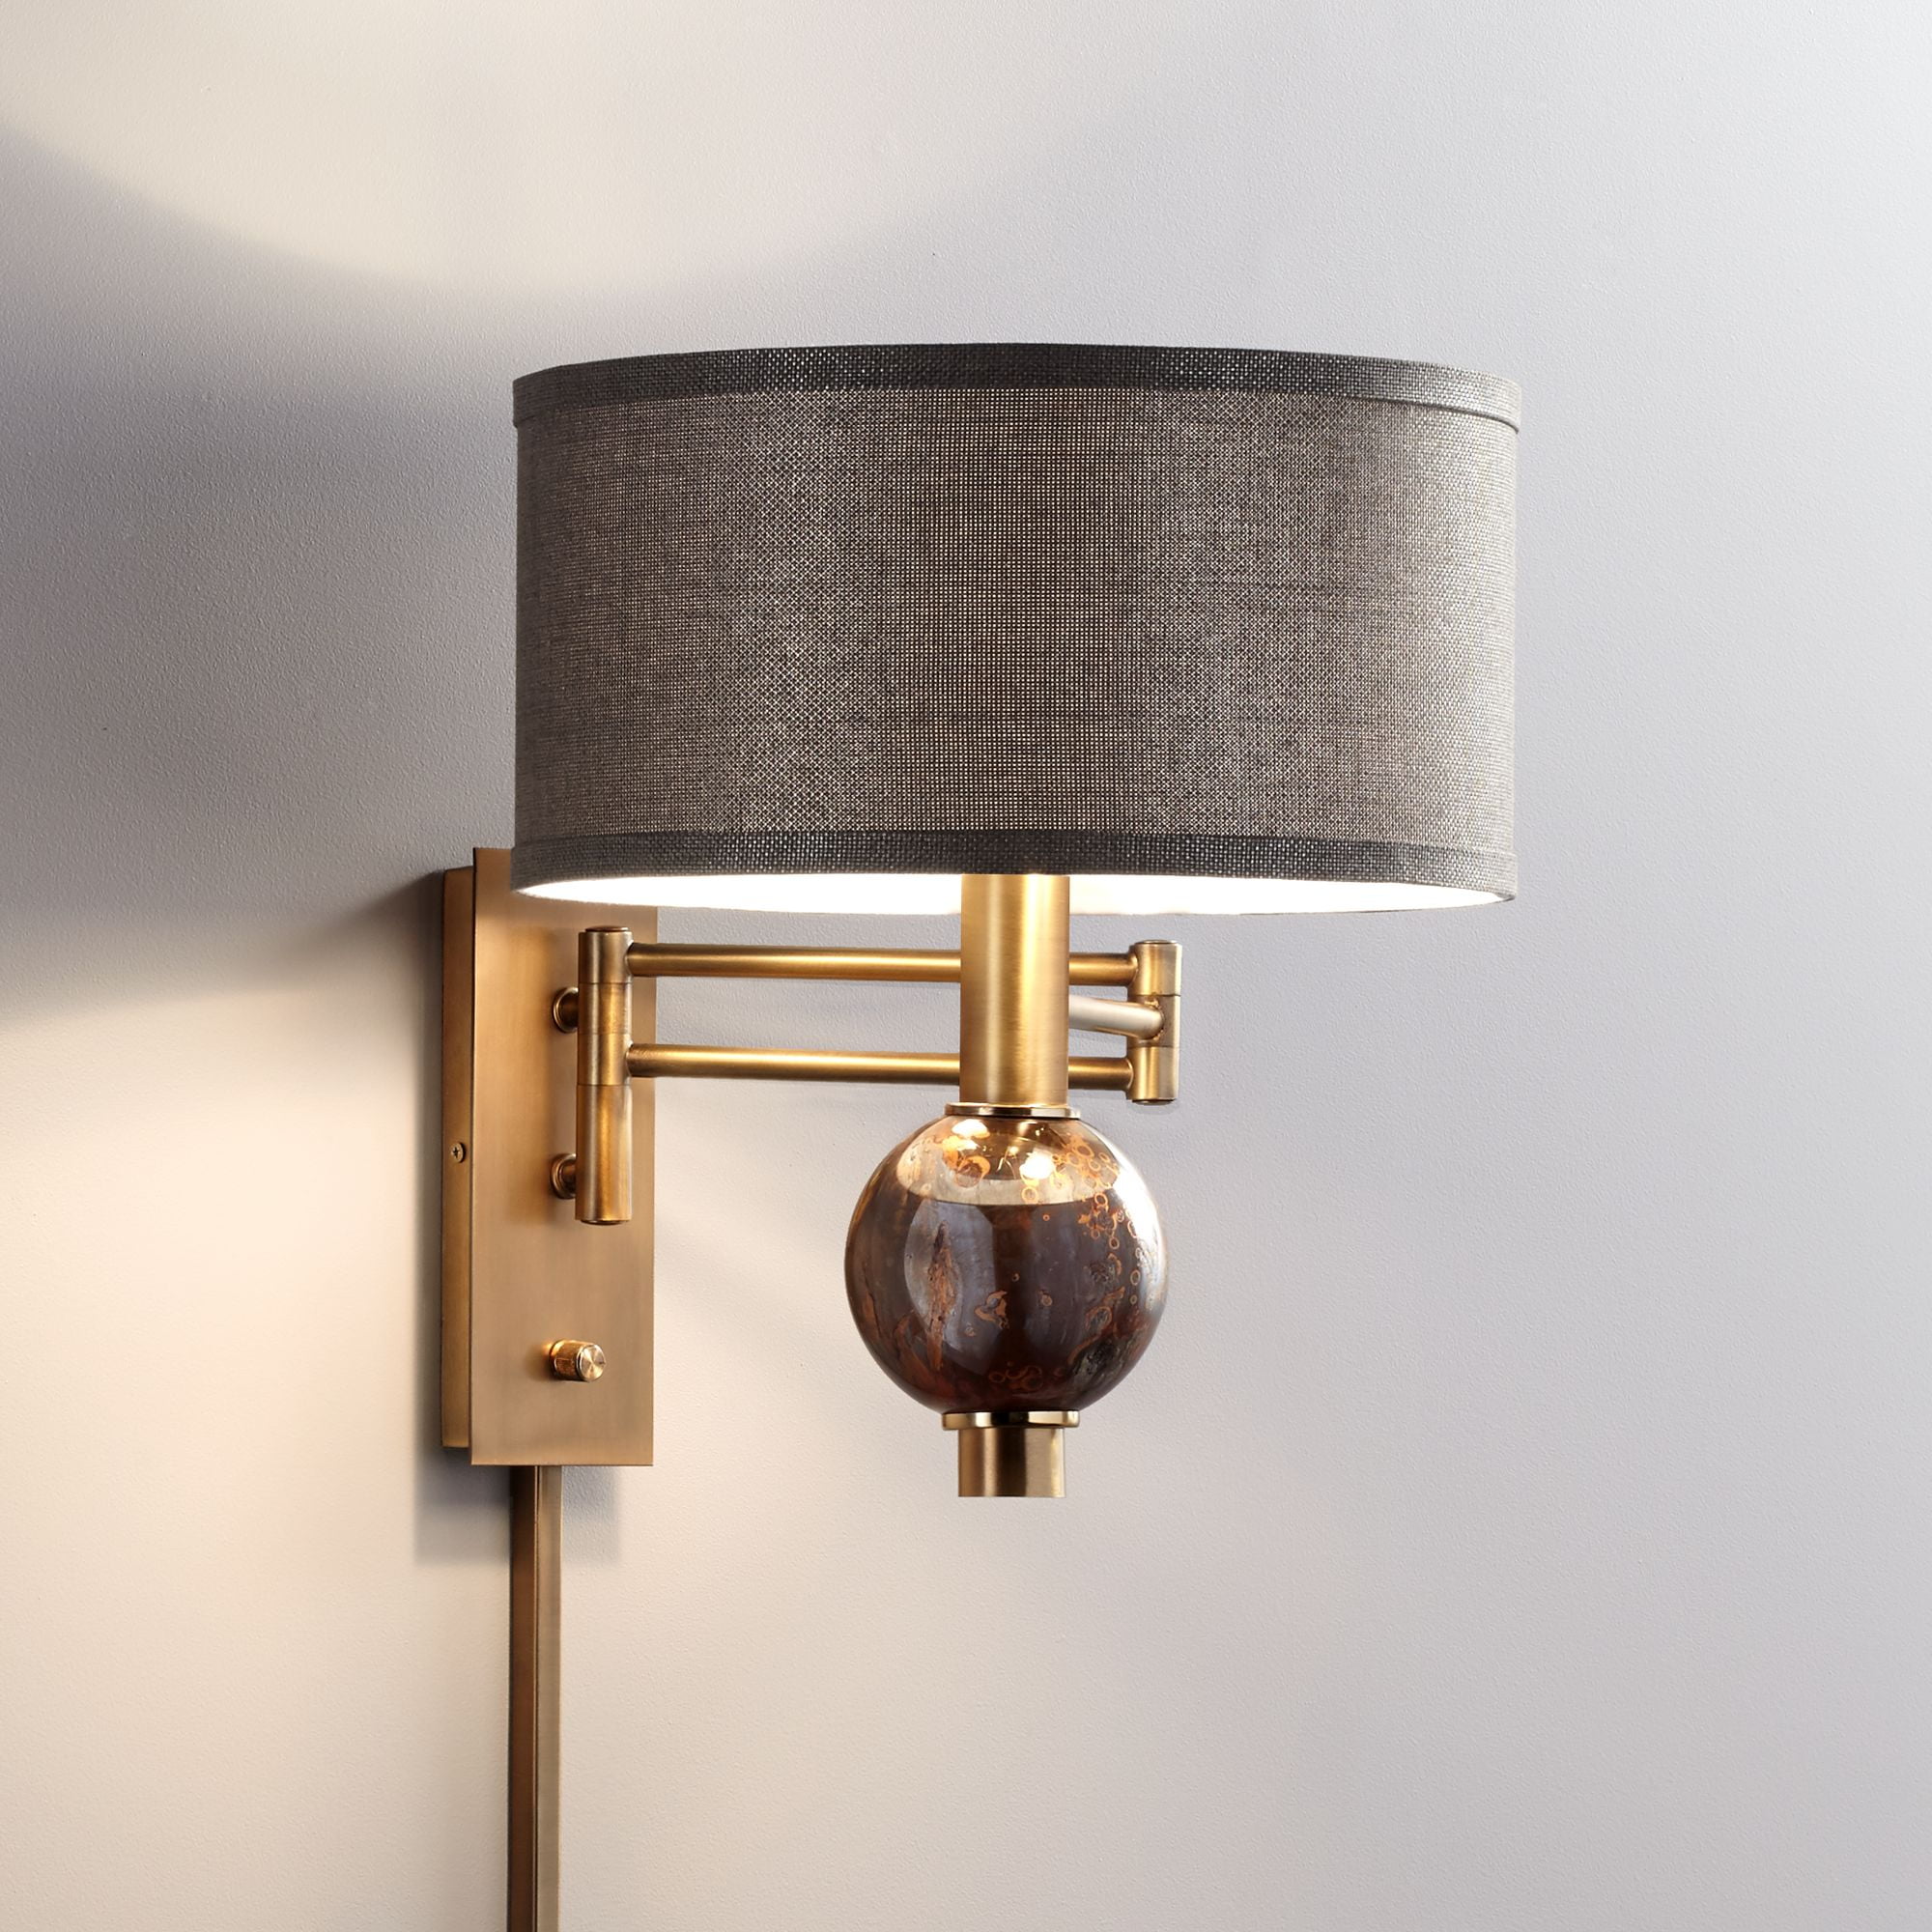 Clear Glass Shade,Modern Matte Black Wall Lamp with Brass Accent Edison Socket for Bedroom,Bedside Living Room,E26 Base TeHenoo Plug in Wall Sconce 